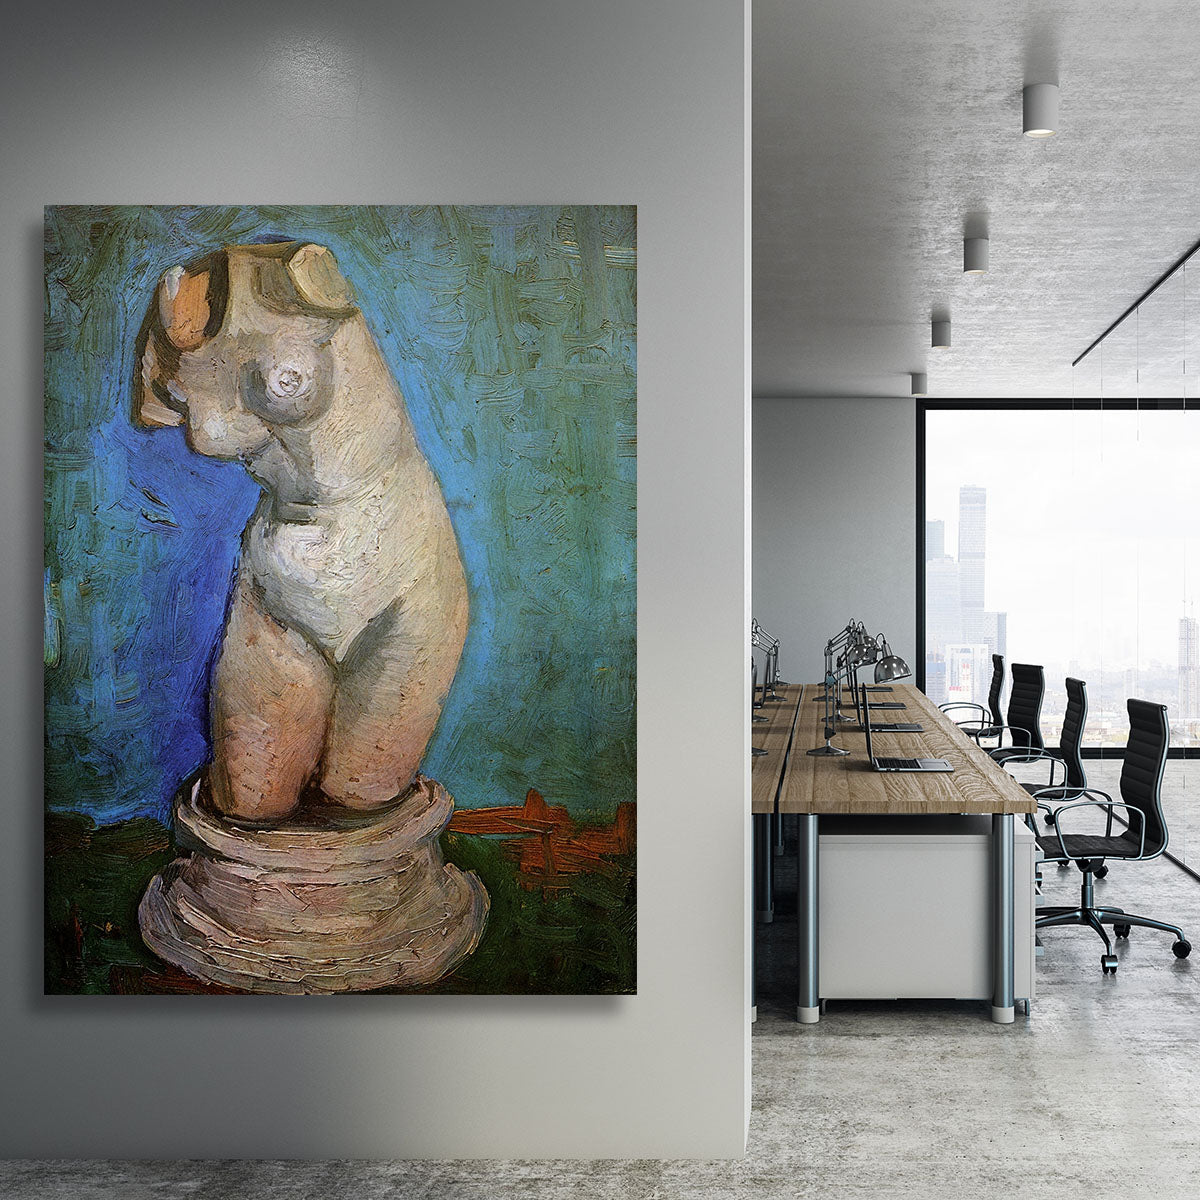 Plaster Statuette of a Female Torso 2 by Van Gogh Canvas Print or Poster - Canvas Art Rocks - 3